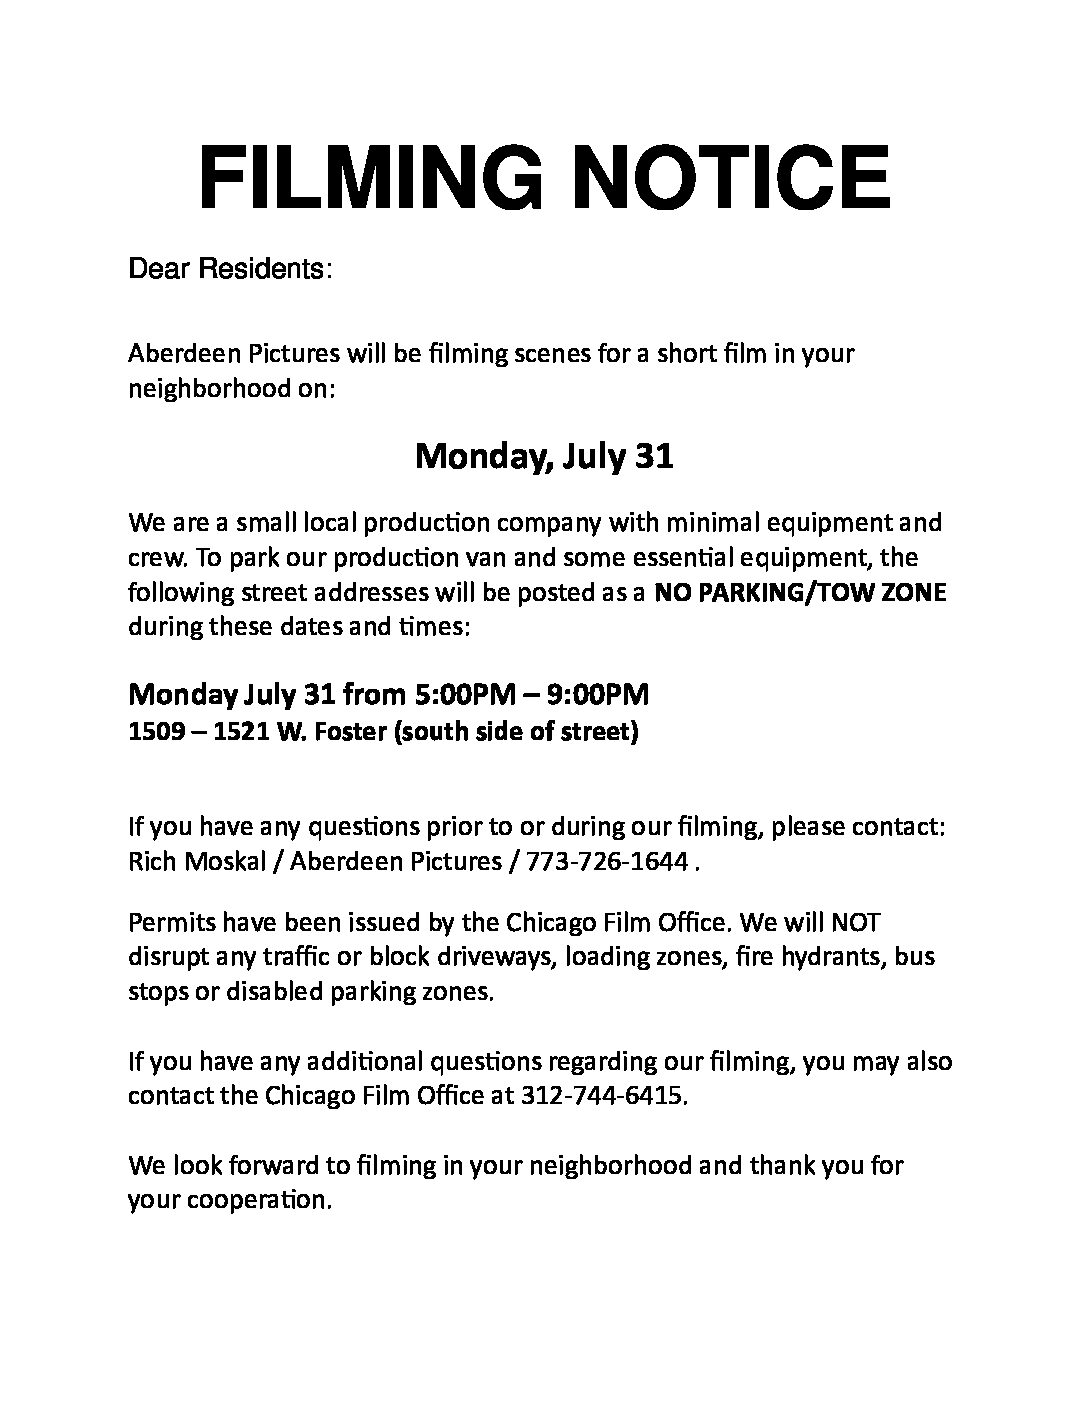 Filming Notice on Foster Ave